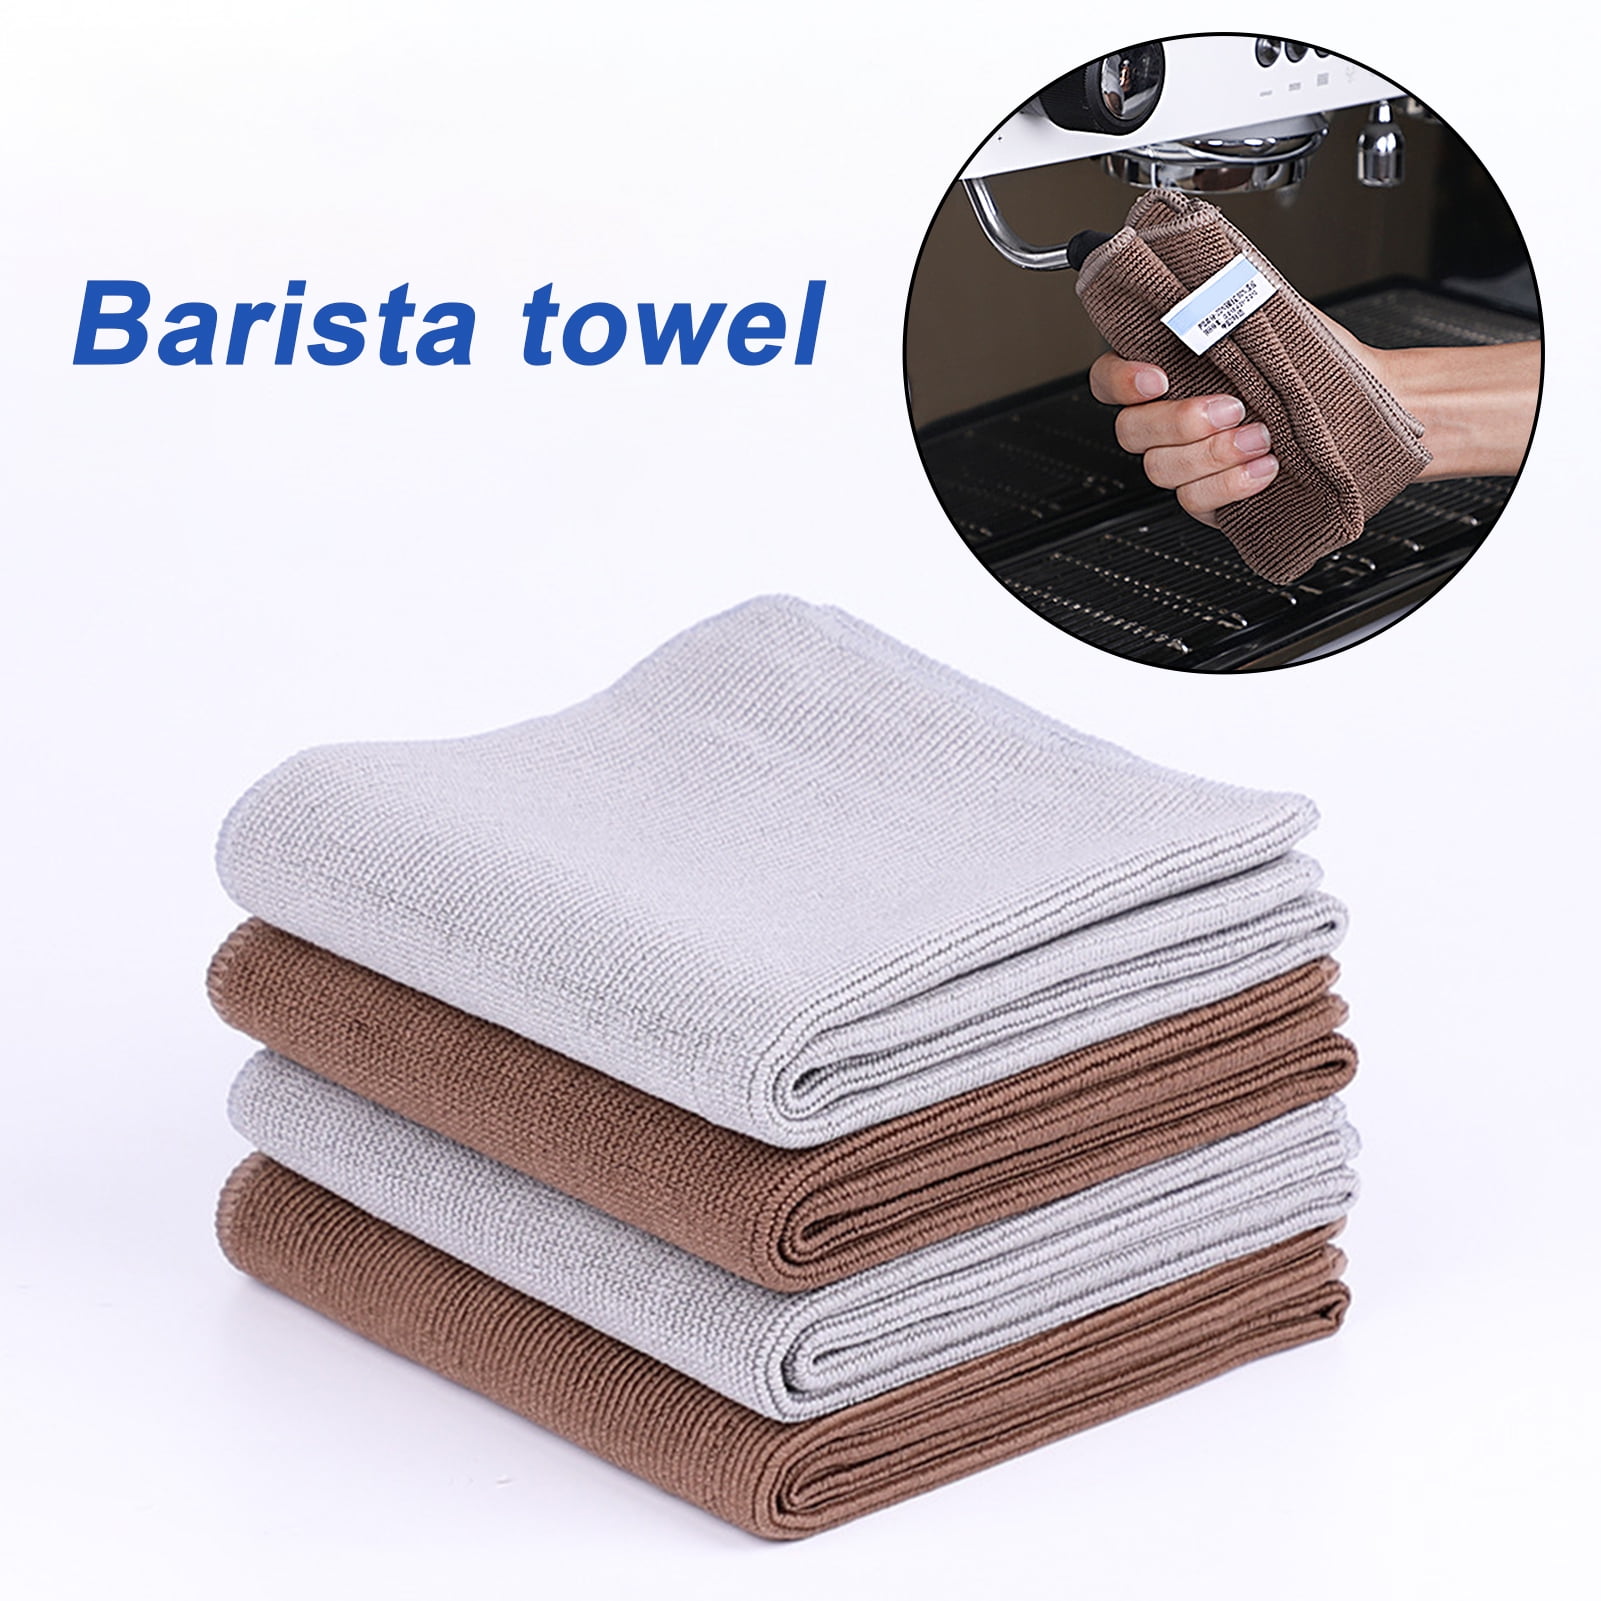 GROFRY Cleaning Cloth Super Absorbent Wear Resistant Polyester Espresso  Machine Cleaning Rag Barista Supplies for Coffee Shop 